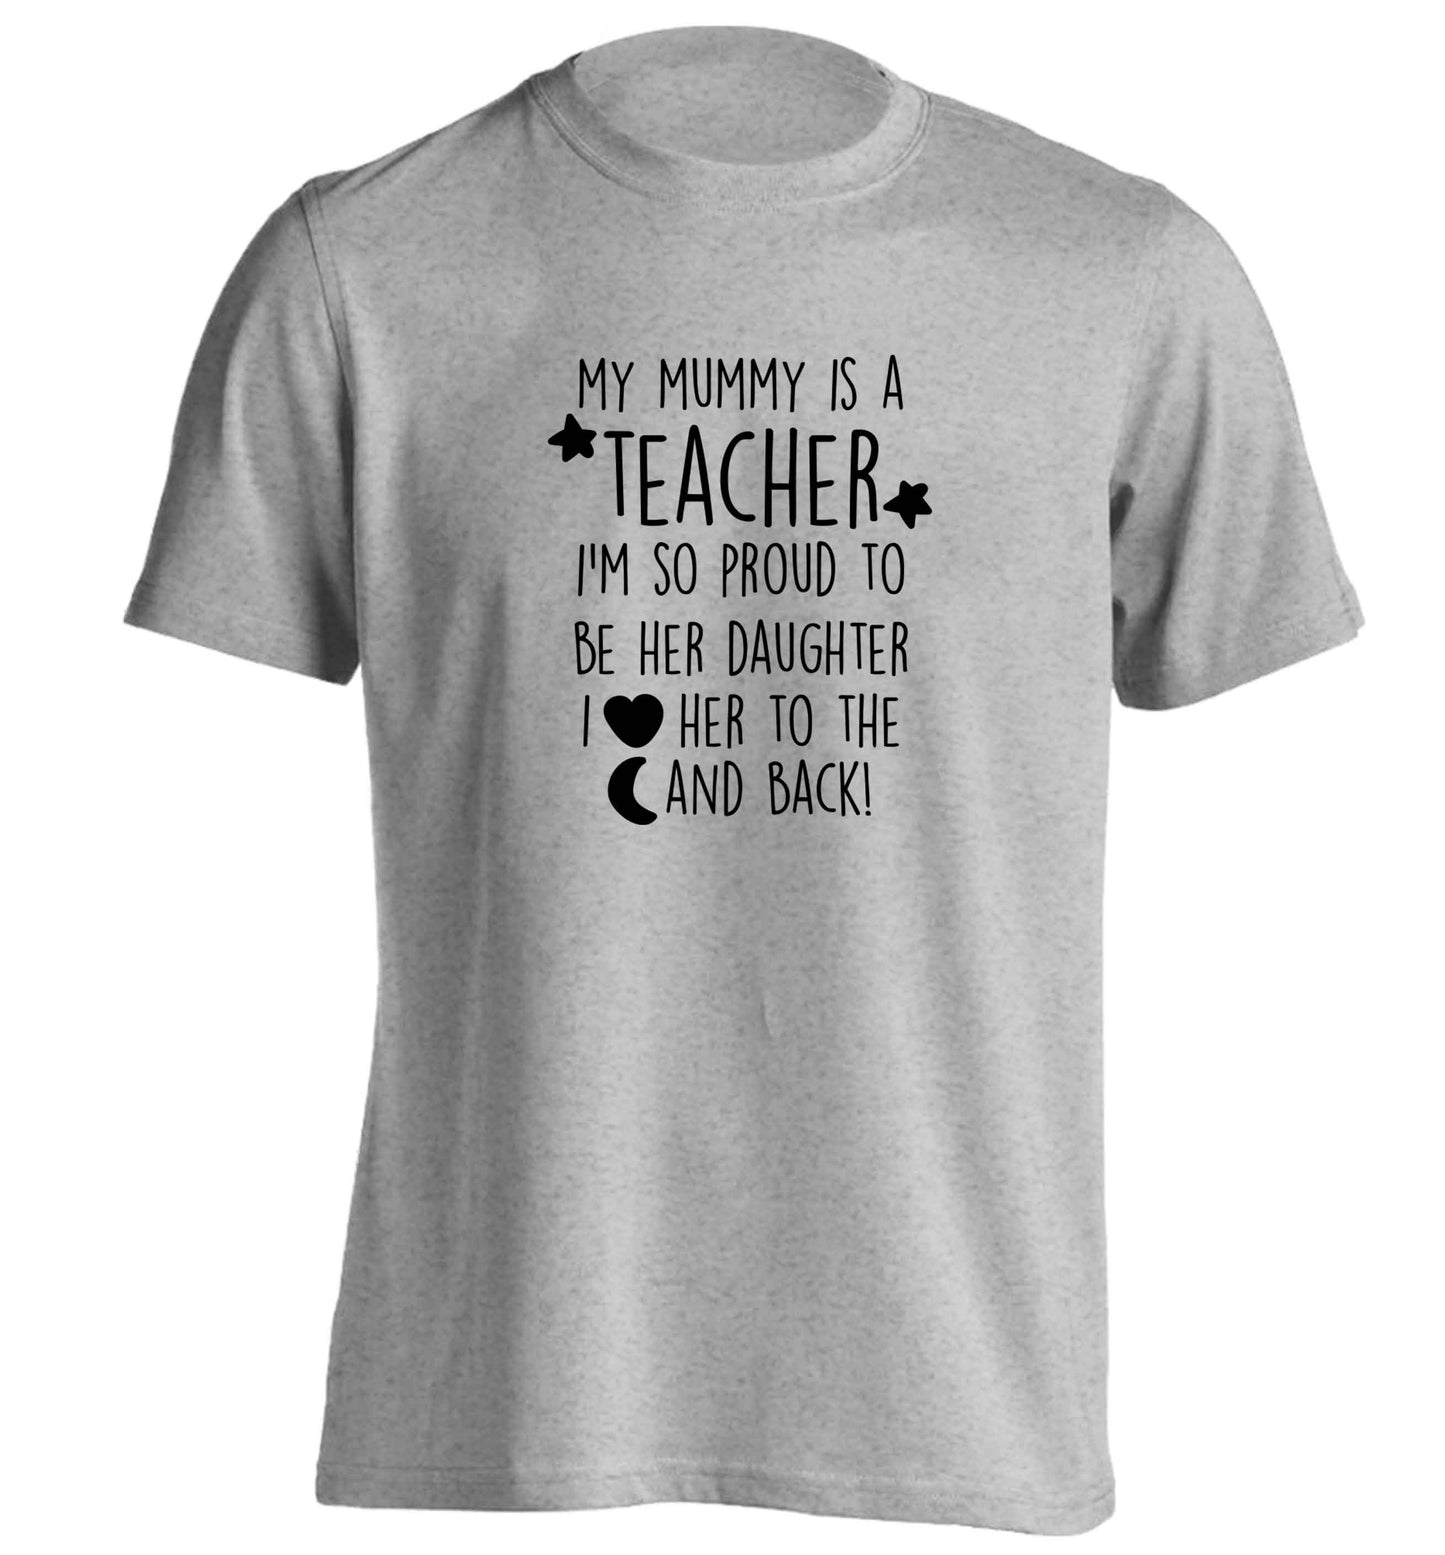 My mummy is a teacher I'm so proud to be her daughter I love her to the moon and back adults unisex grey Tshirt 2XL